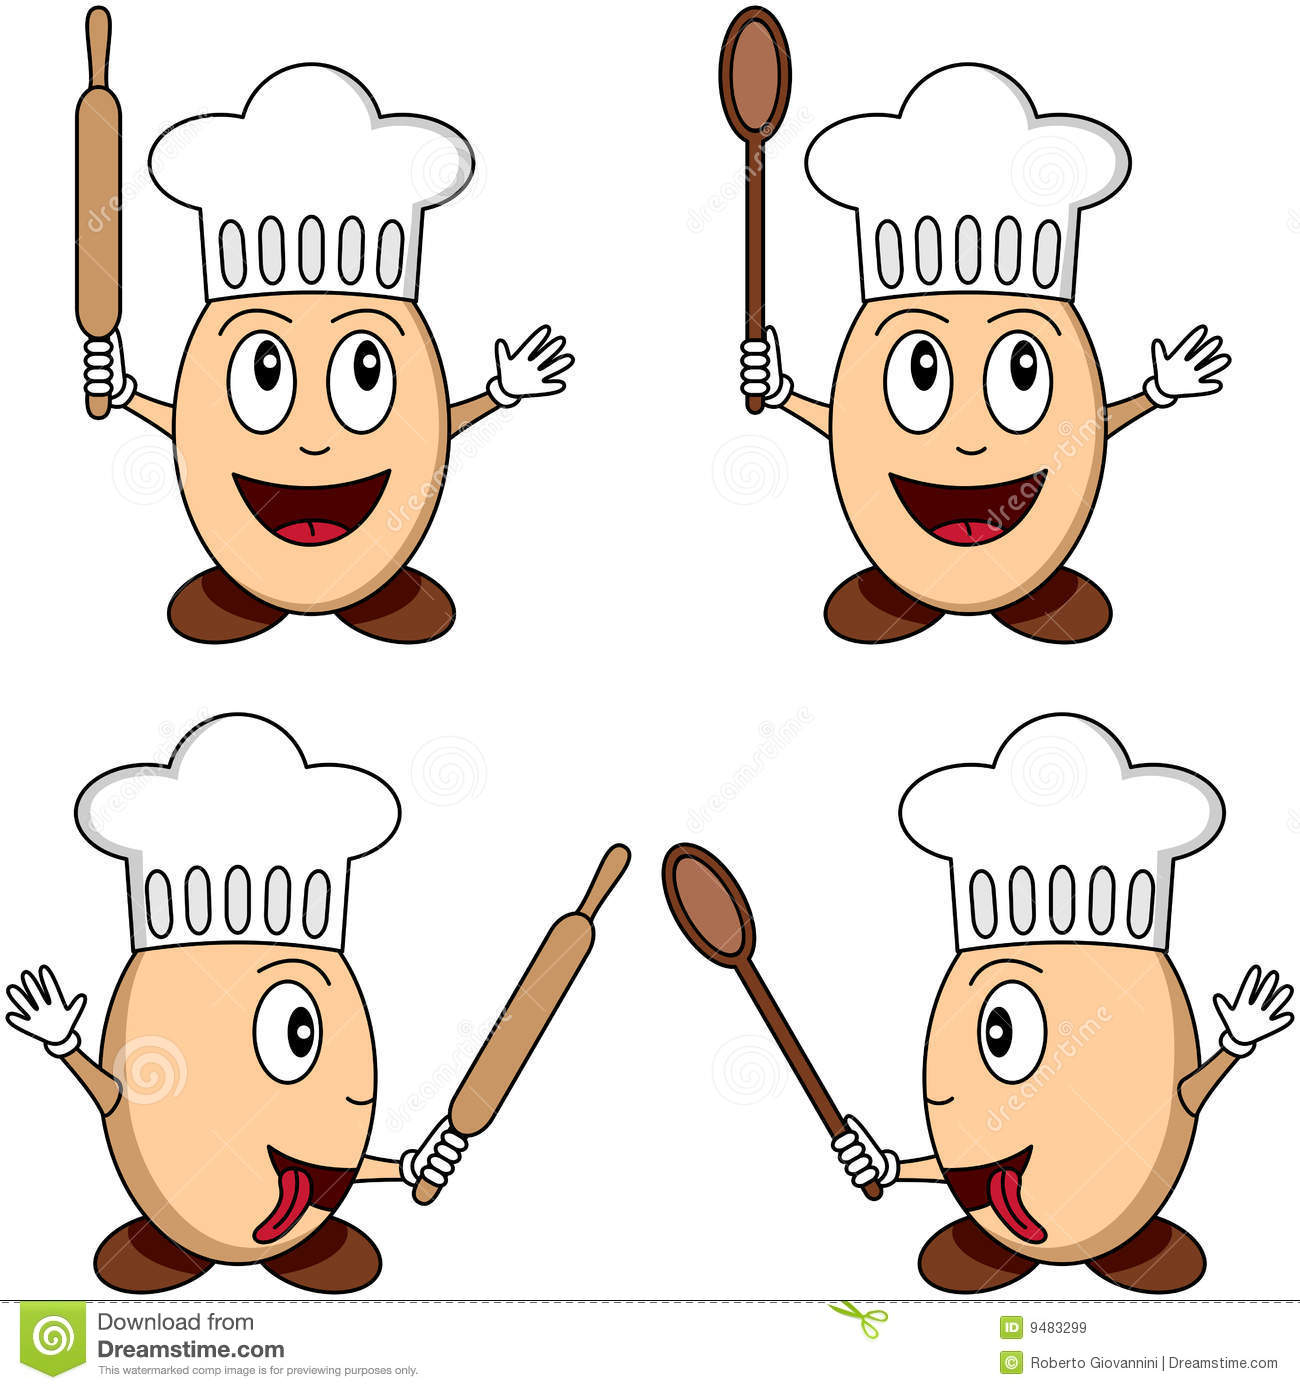 Cartoon Egg Chef Characters Royalty Free Stock Images   Image  9483299